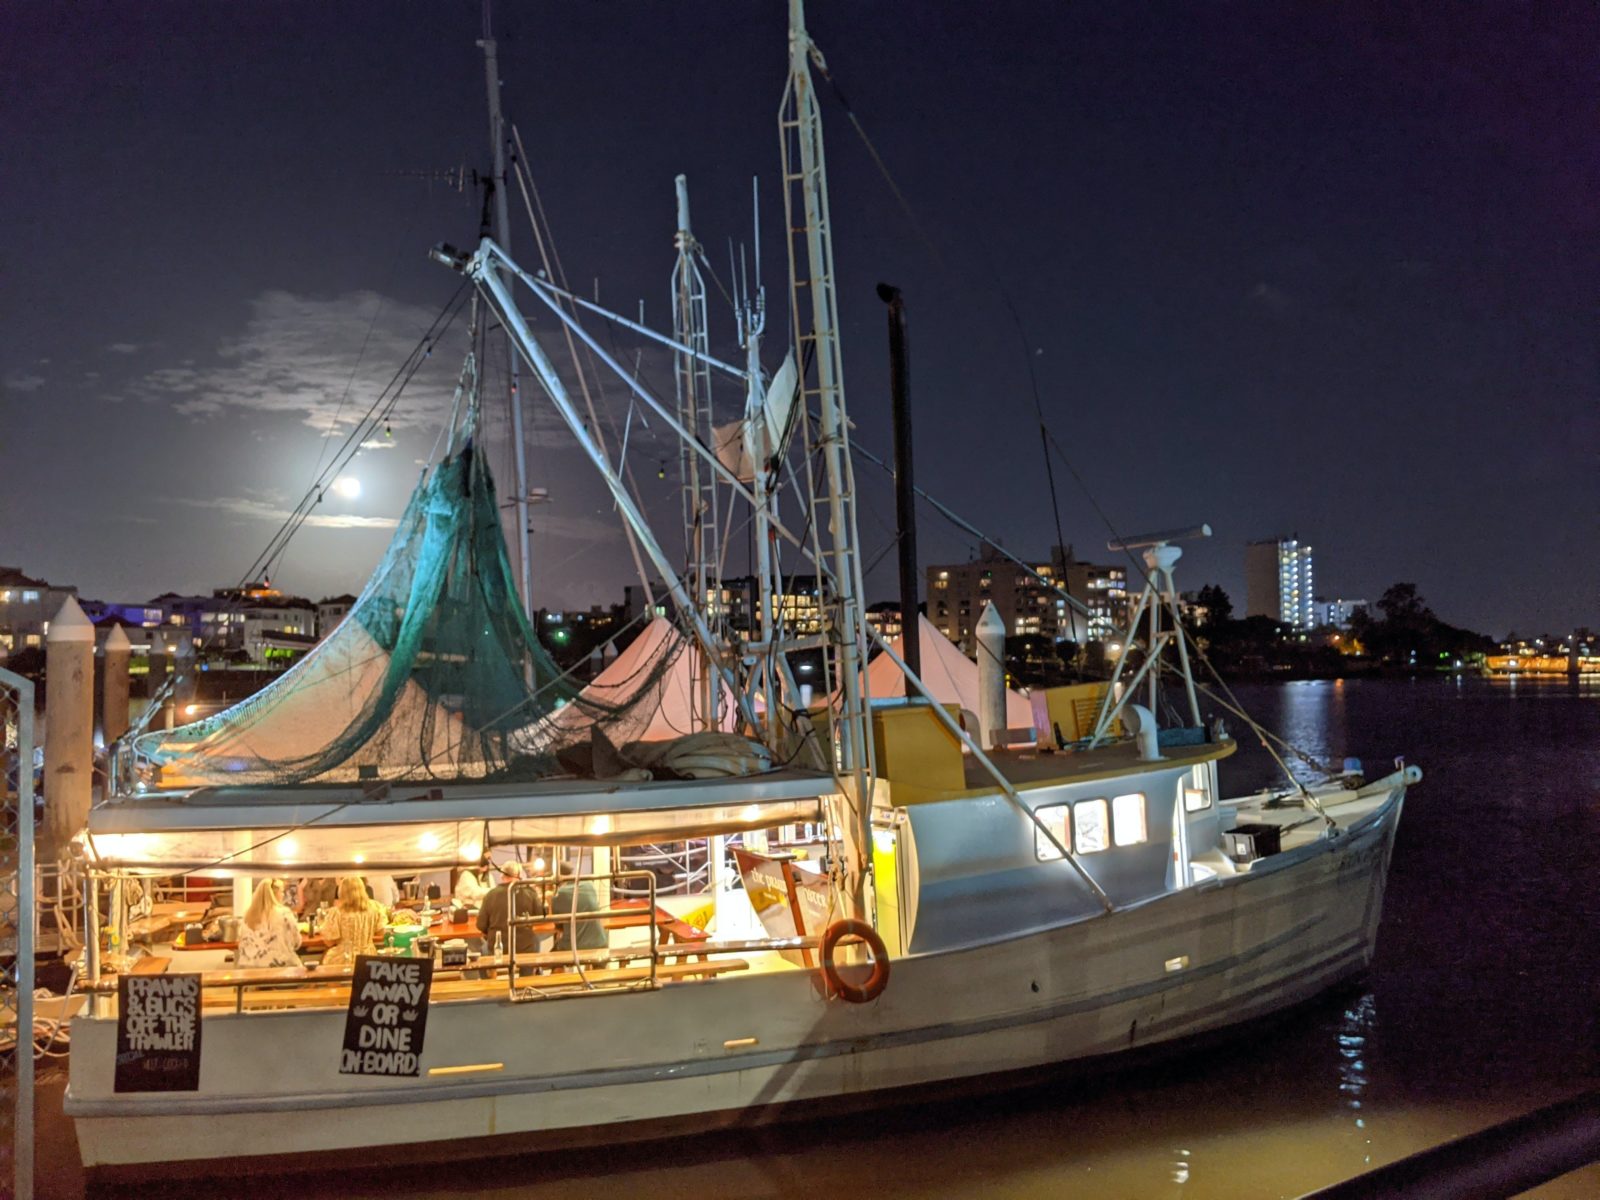 On water seafood dining experience, right in Brisbane's CBD